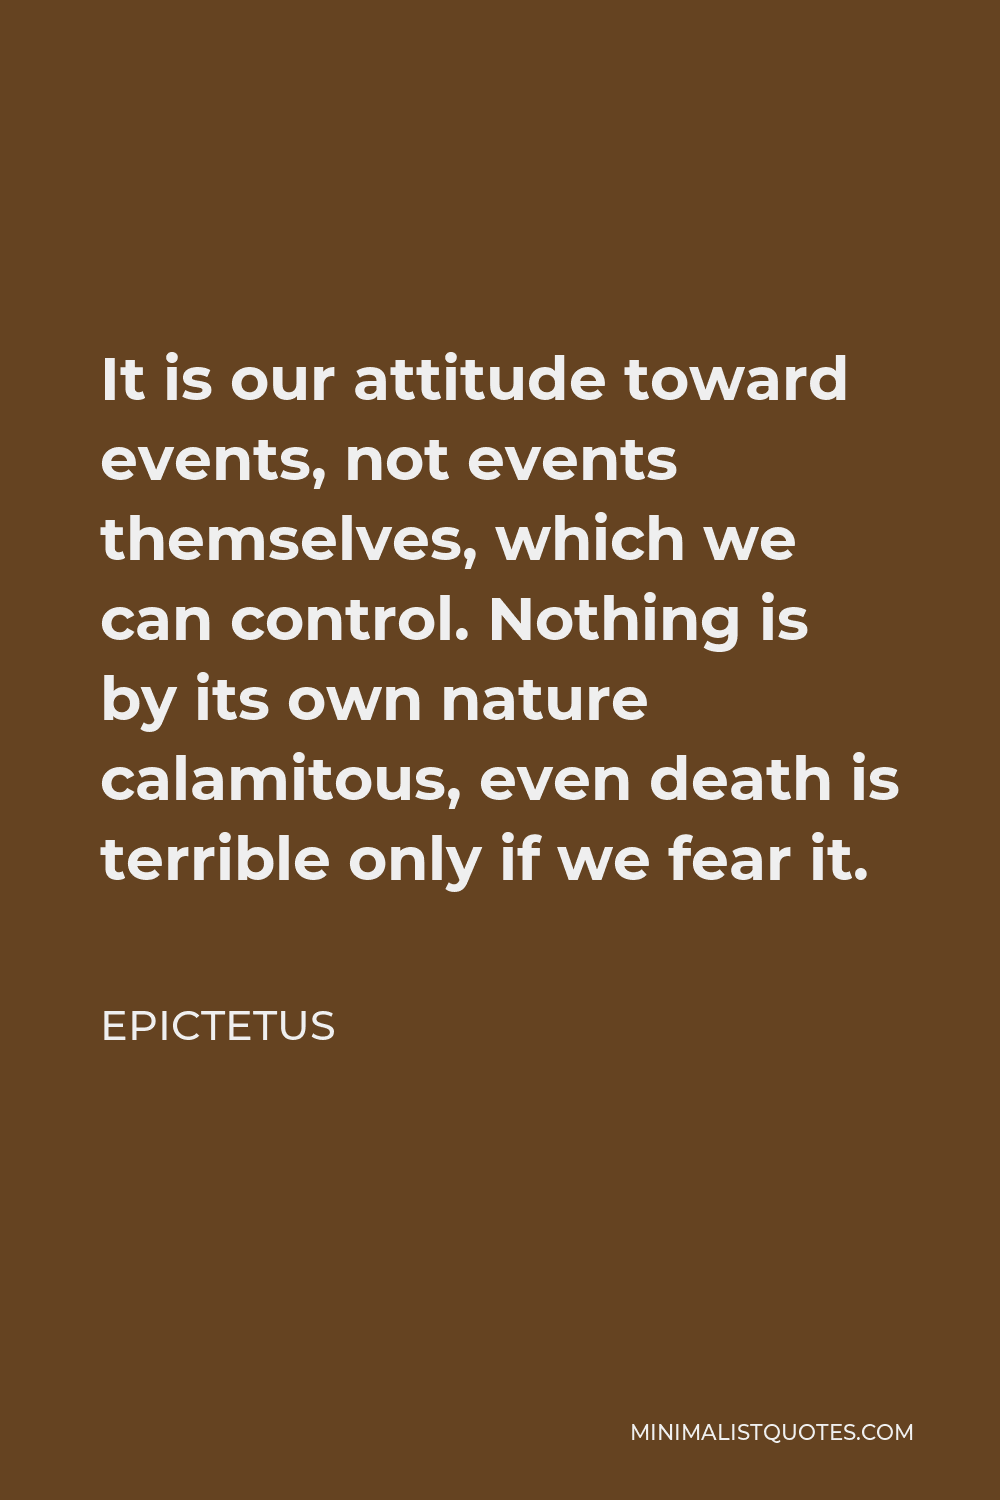 Epictetus Quote - It is our attitude toward events, not events themselves, which we can control. Nothing is by its own nature calamitous, even death is terrible only if we fear it.